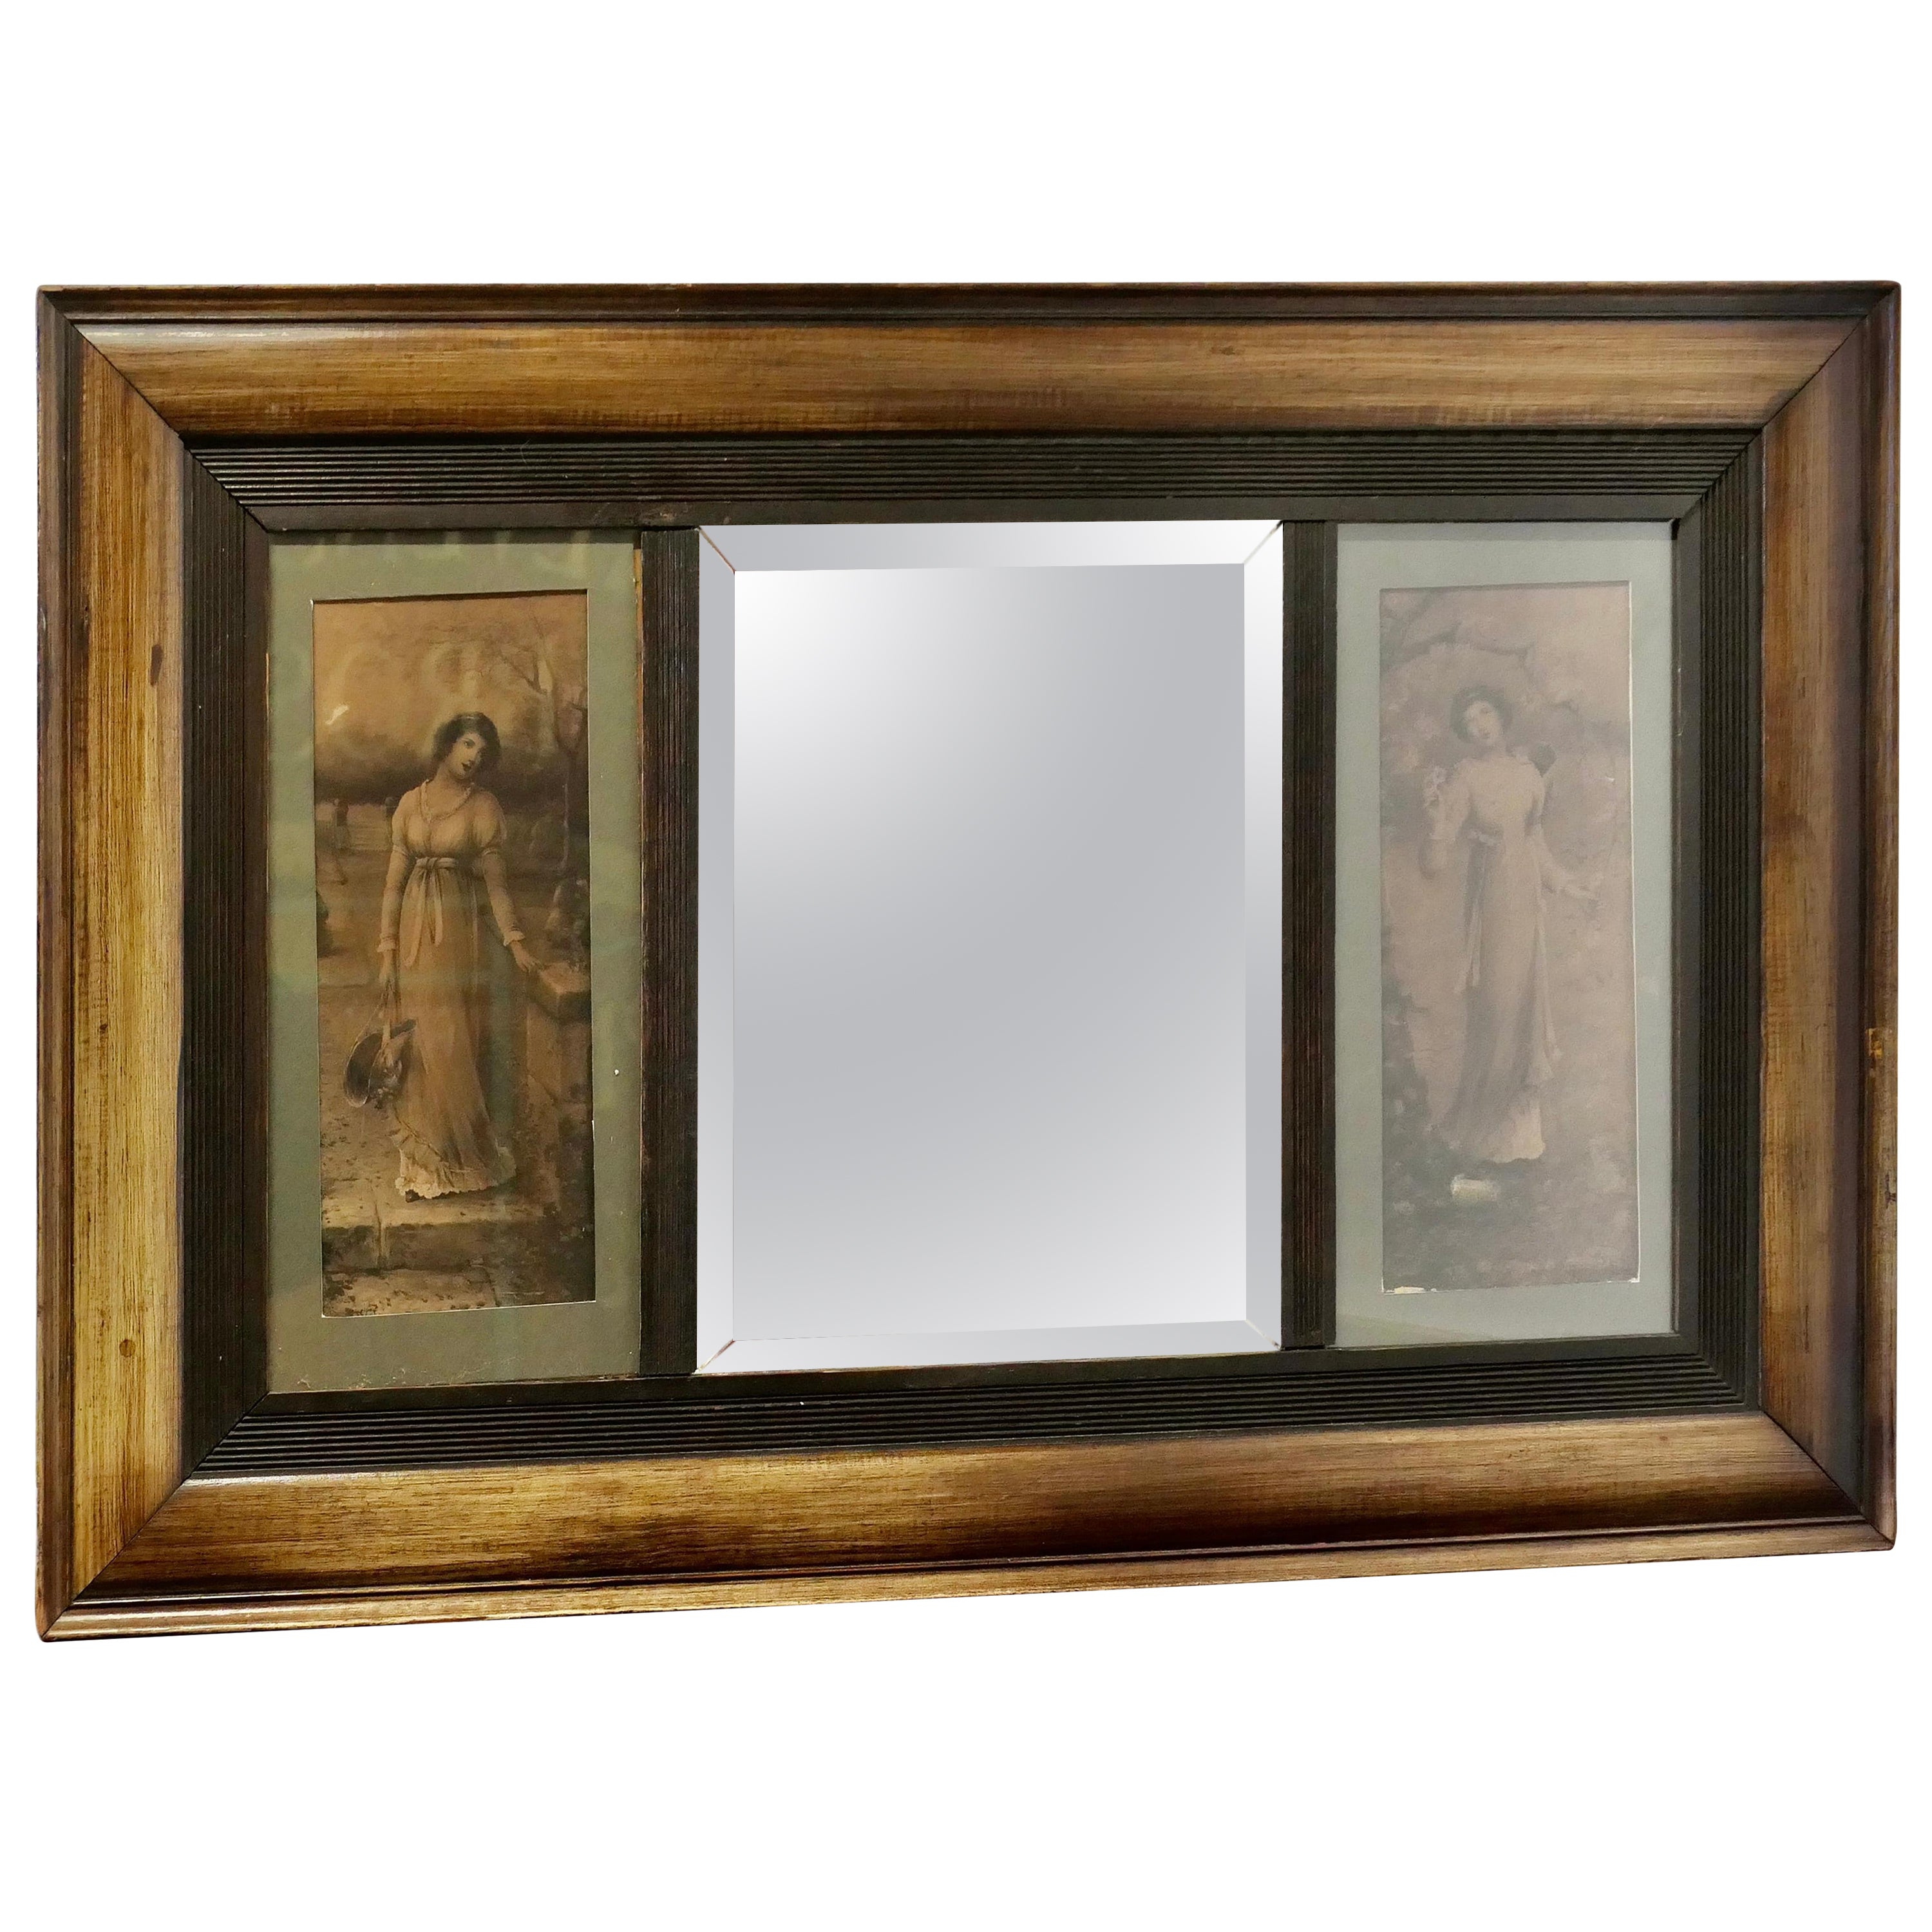 Edwardian Wall Mirror with Prints  This is a lovely decorative piece  For Sale